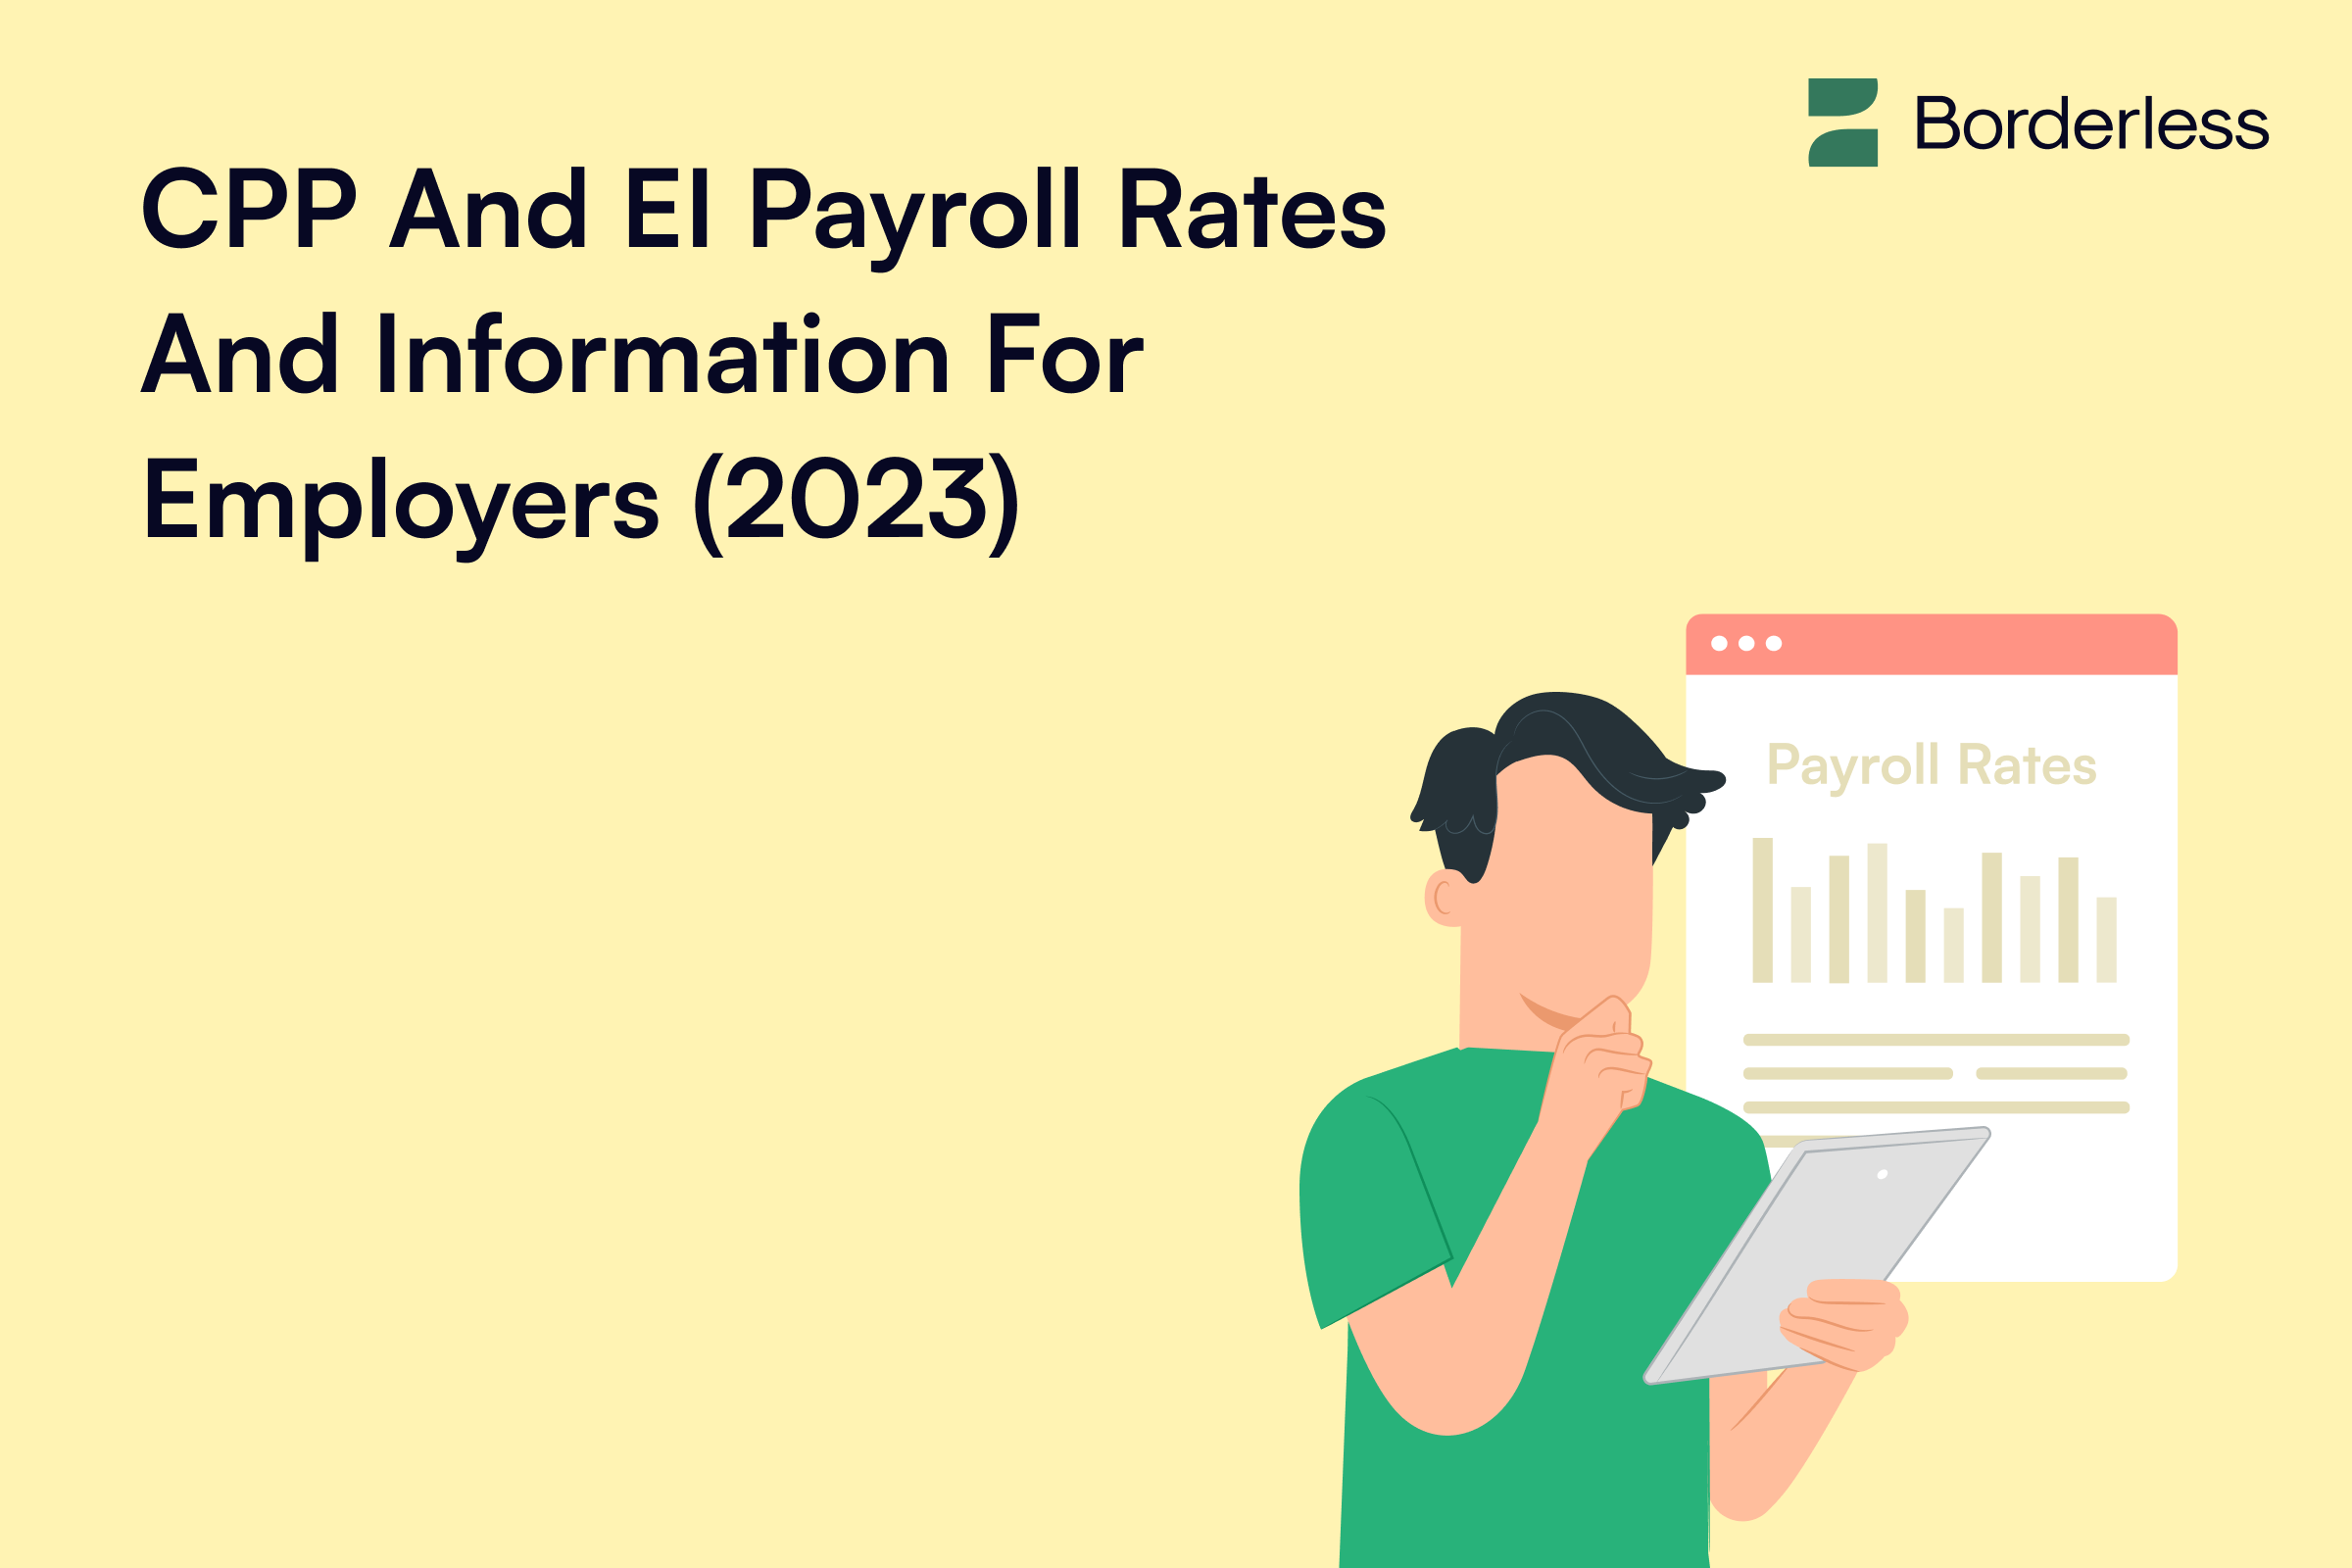 CPP and EI Payroll Rates and Employer Information Borderless